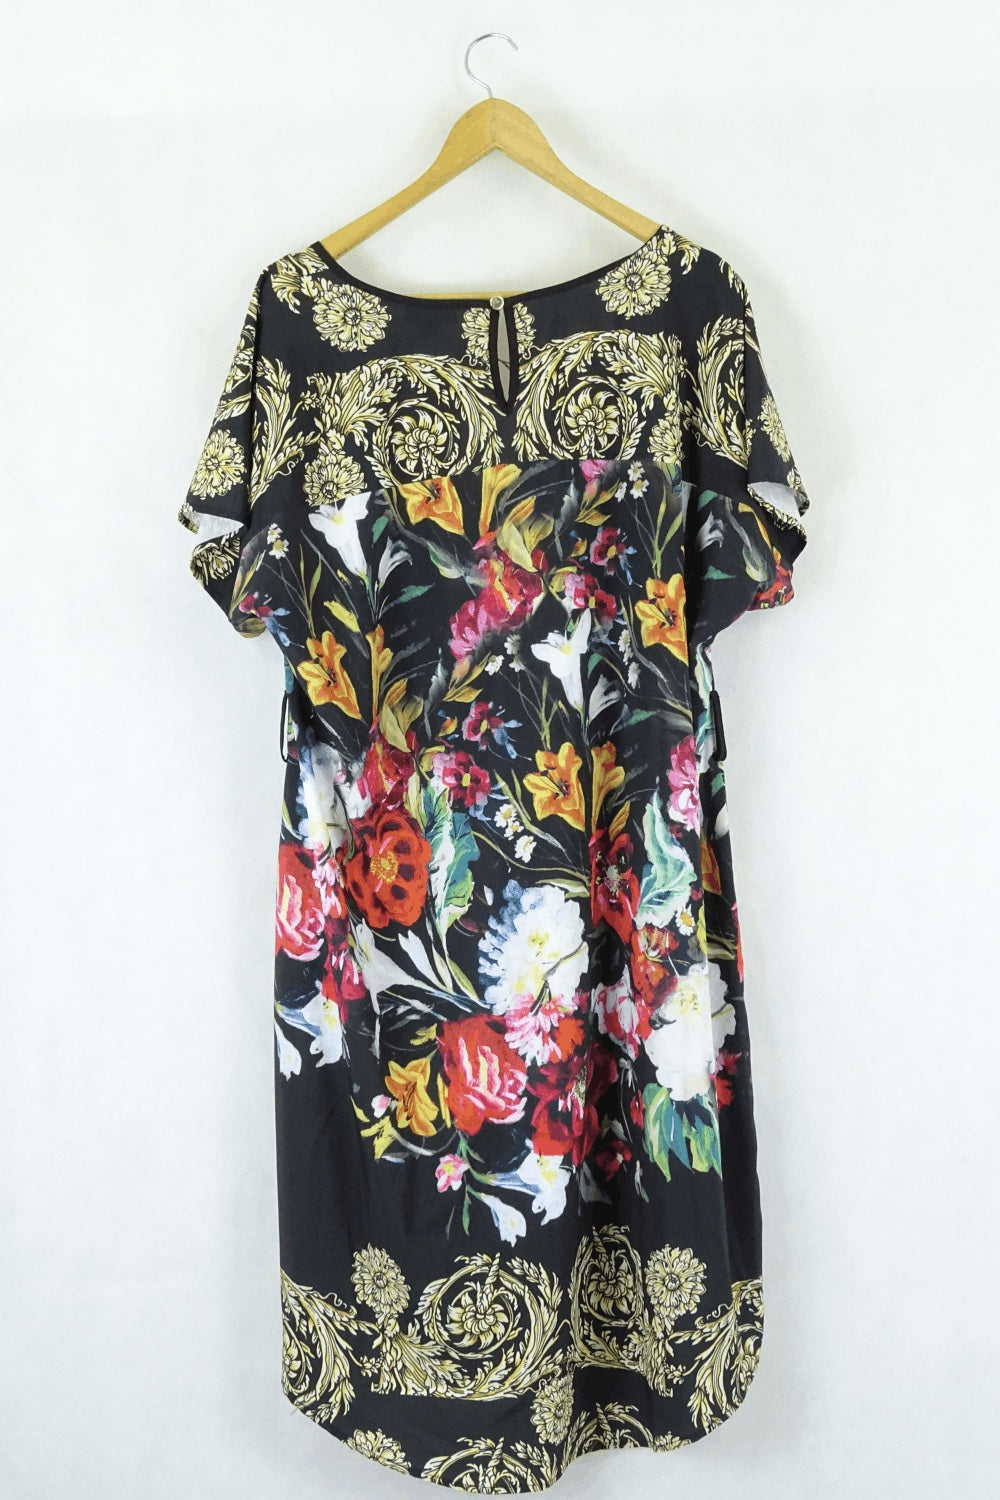 City Chic Multi-Coloured Floral Printed Tunic Dress S